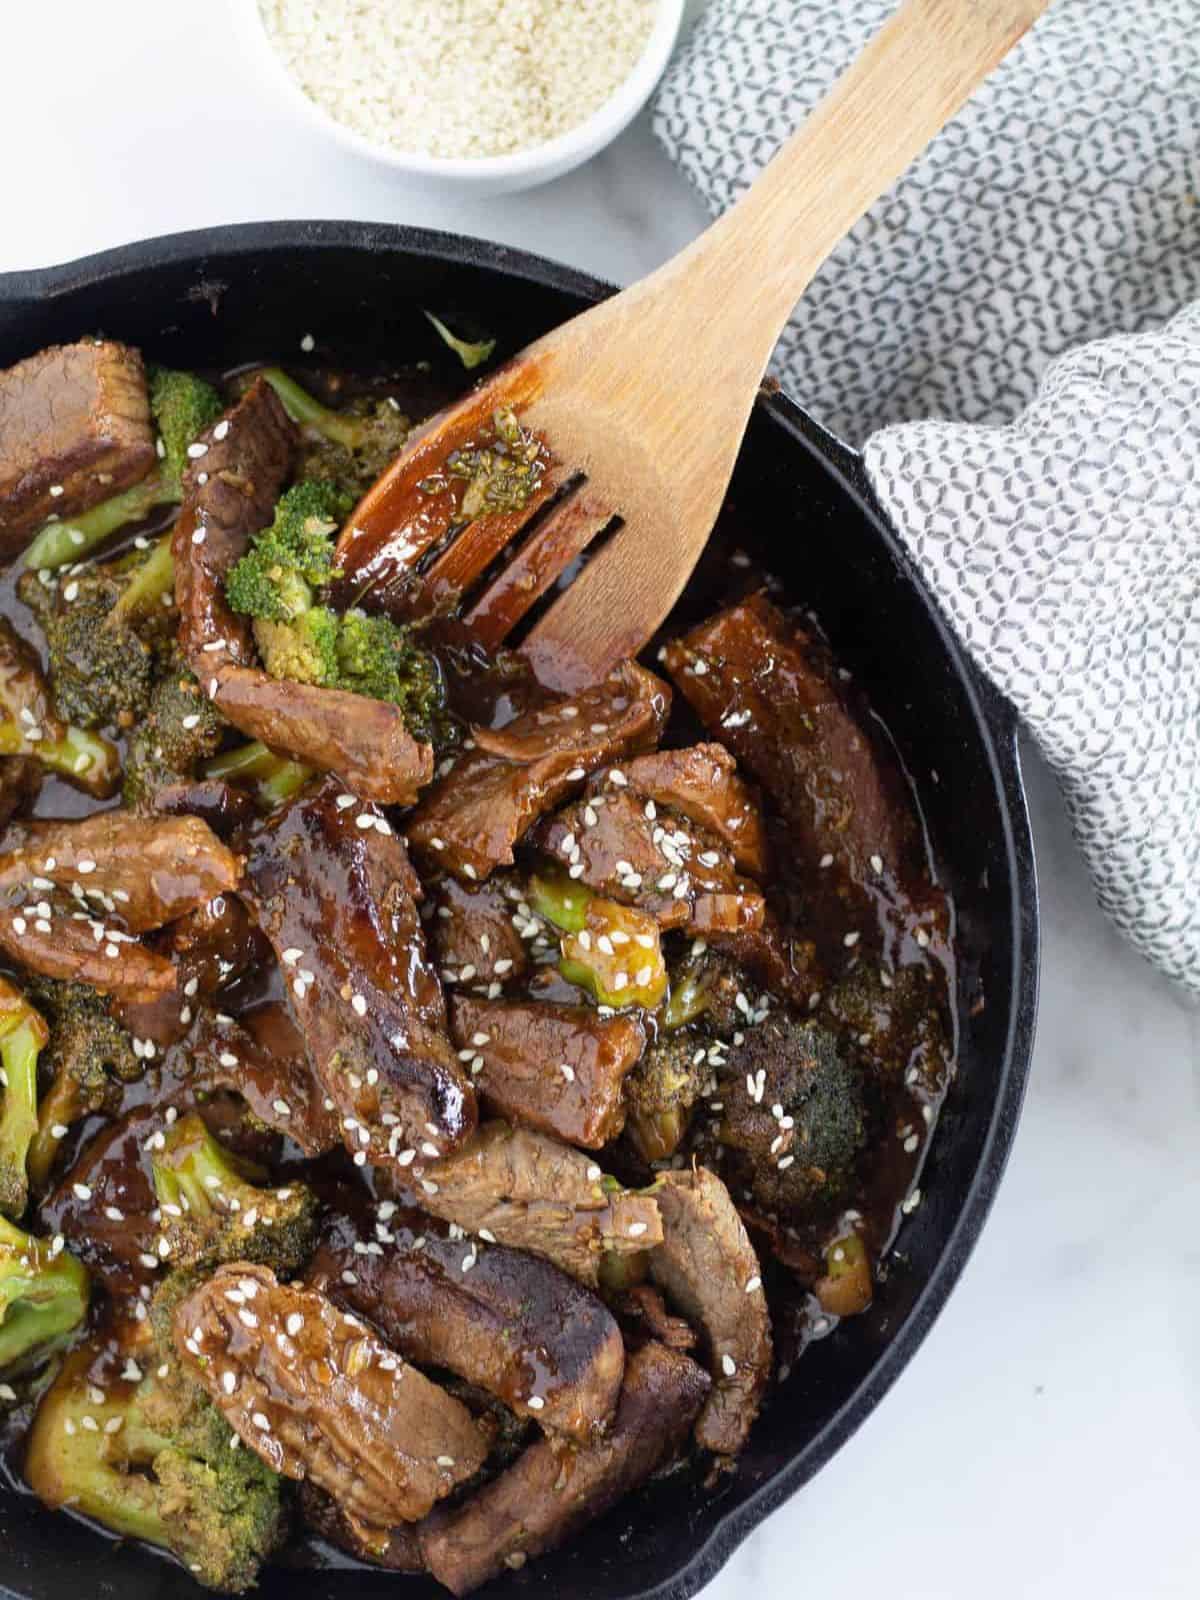 Finished low-carb broccoli beef in a cast-iron skillet with sesame seeds.